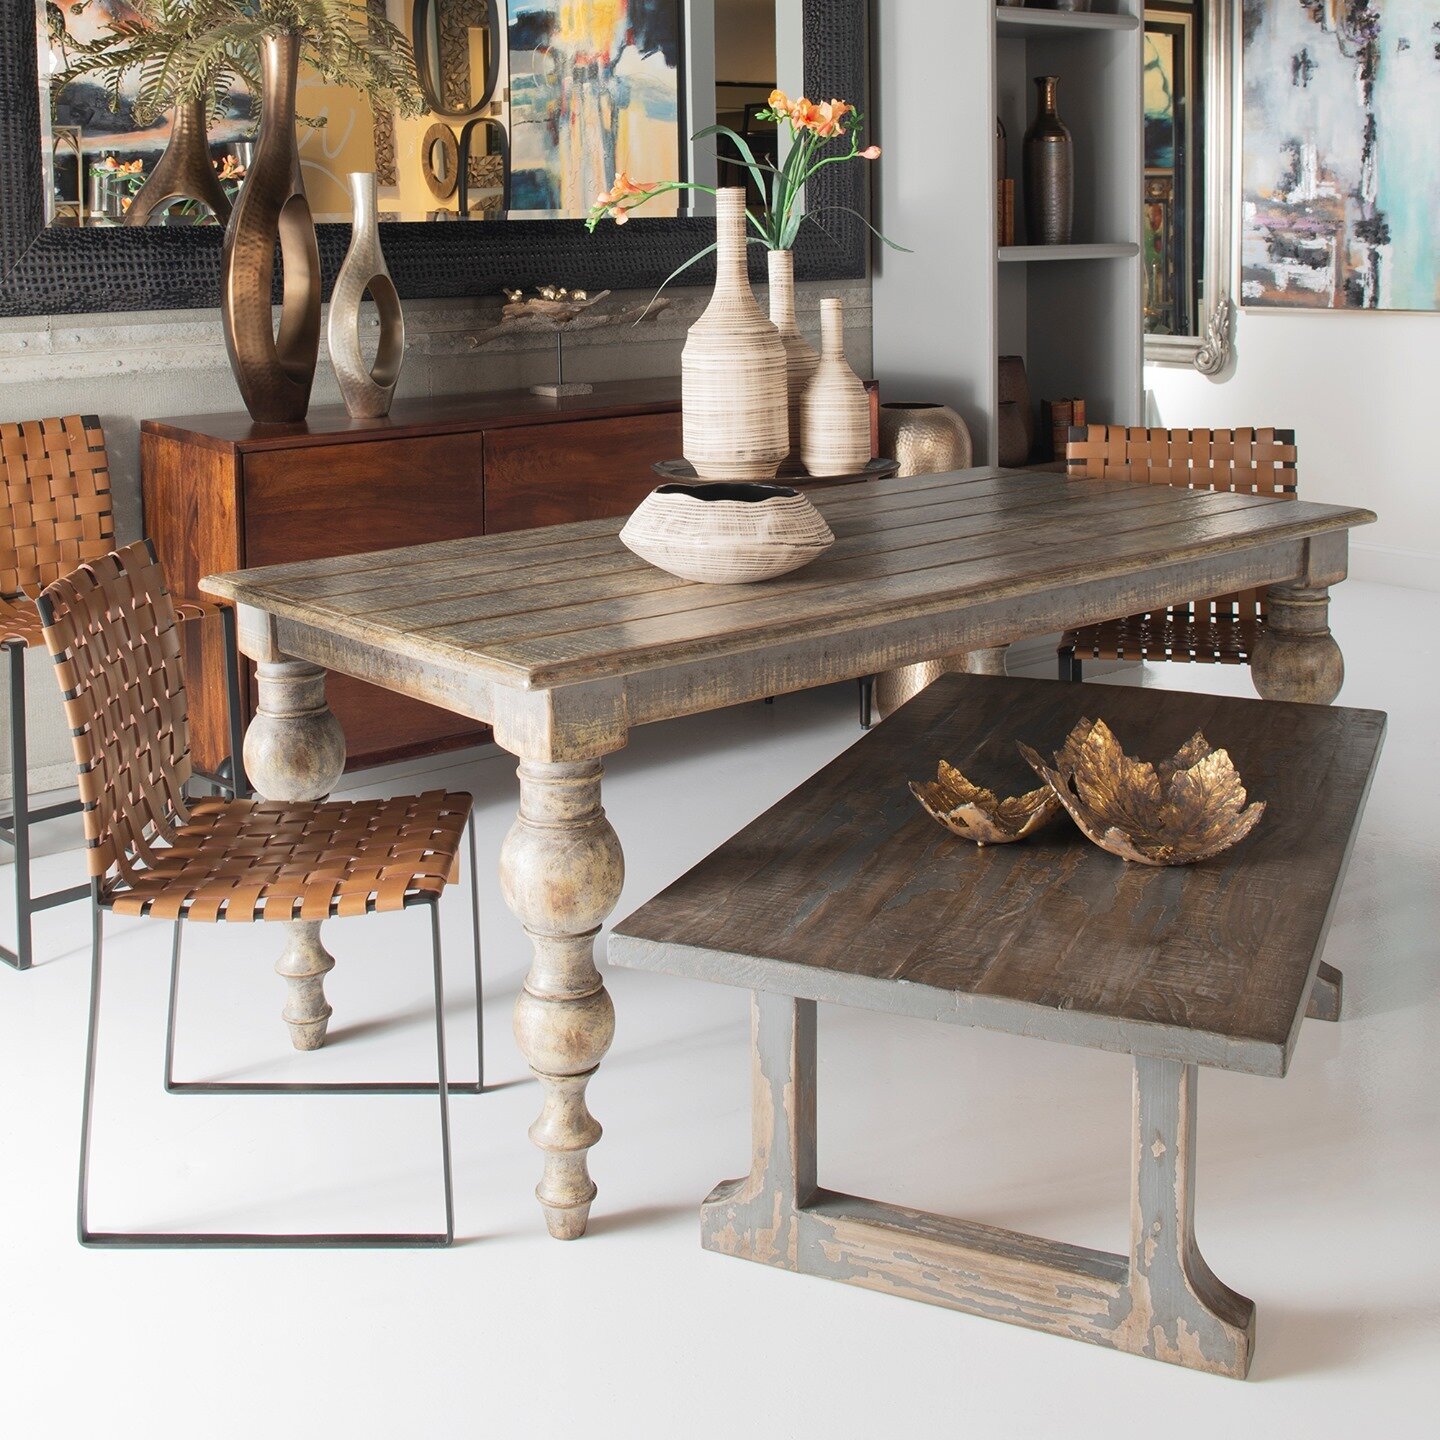 Our antique buying trips throughout the world have opened our eyes to a number of styles and finishes that are still sought after to this day. 

This table collection with its distressed wood and gray finish on a farmhouse styled design is creating a